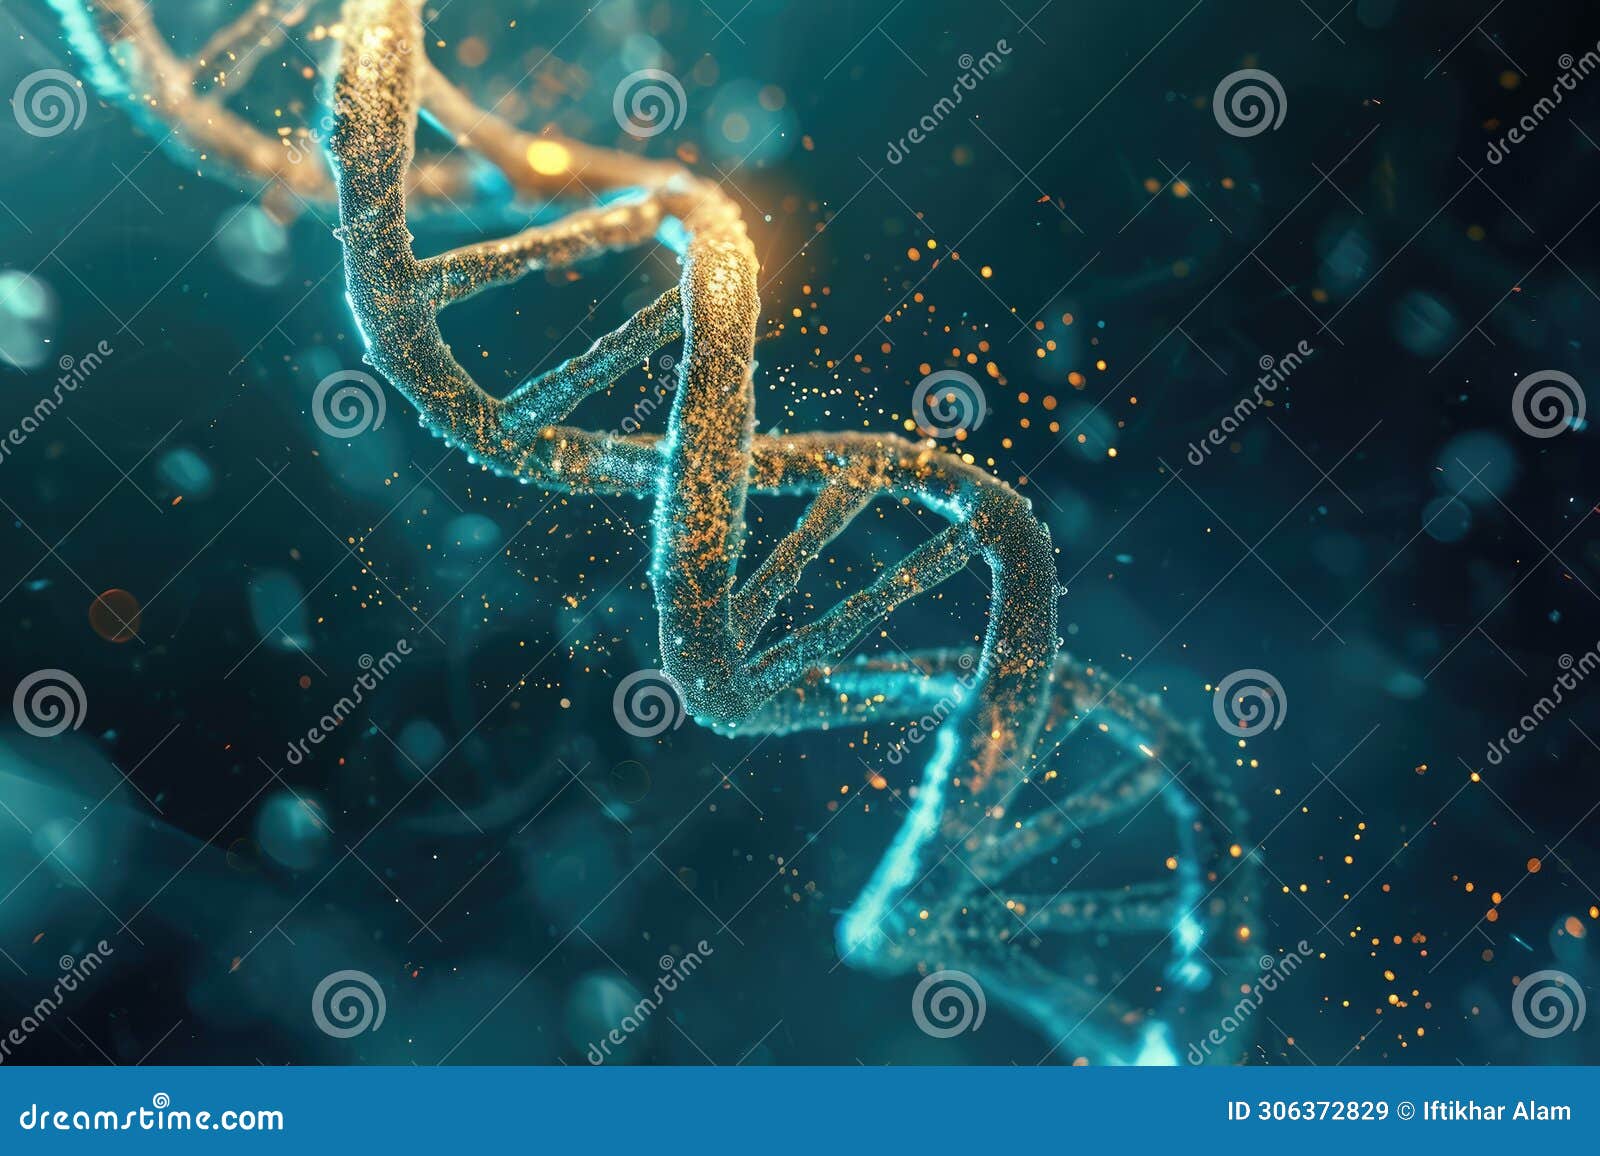 3d rendering of a double-stranded strand of strands, an intricate depiction of a dna helix being manipulated, ai generated